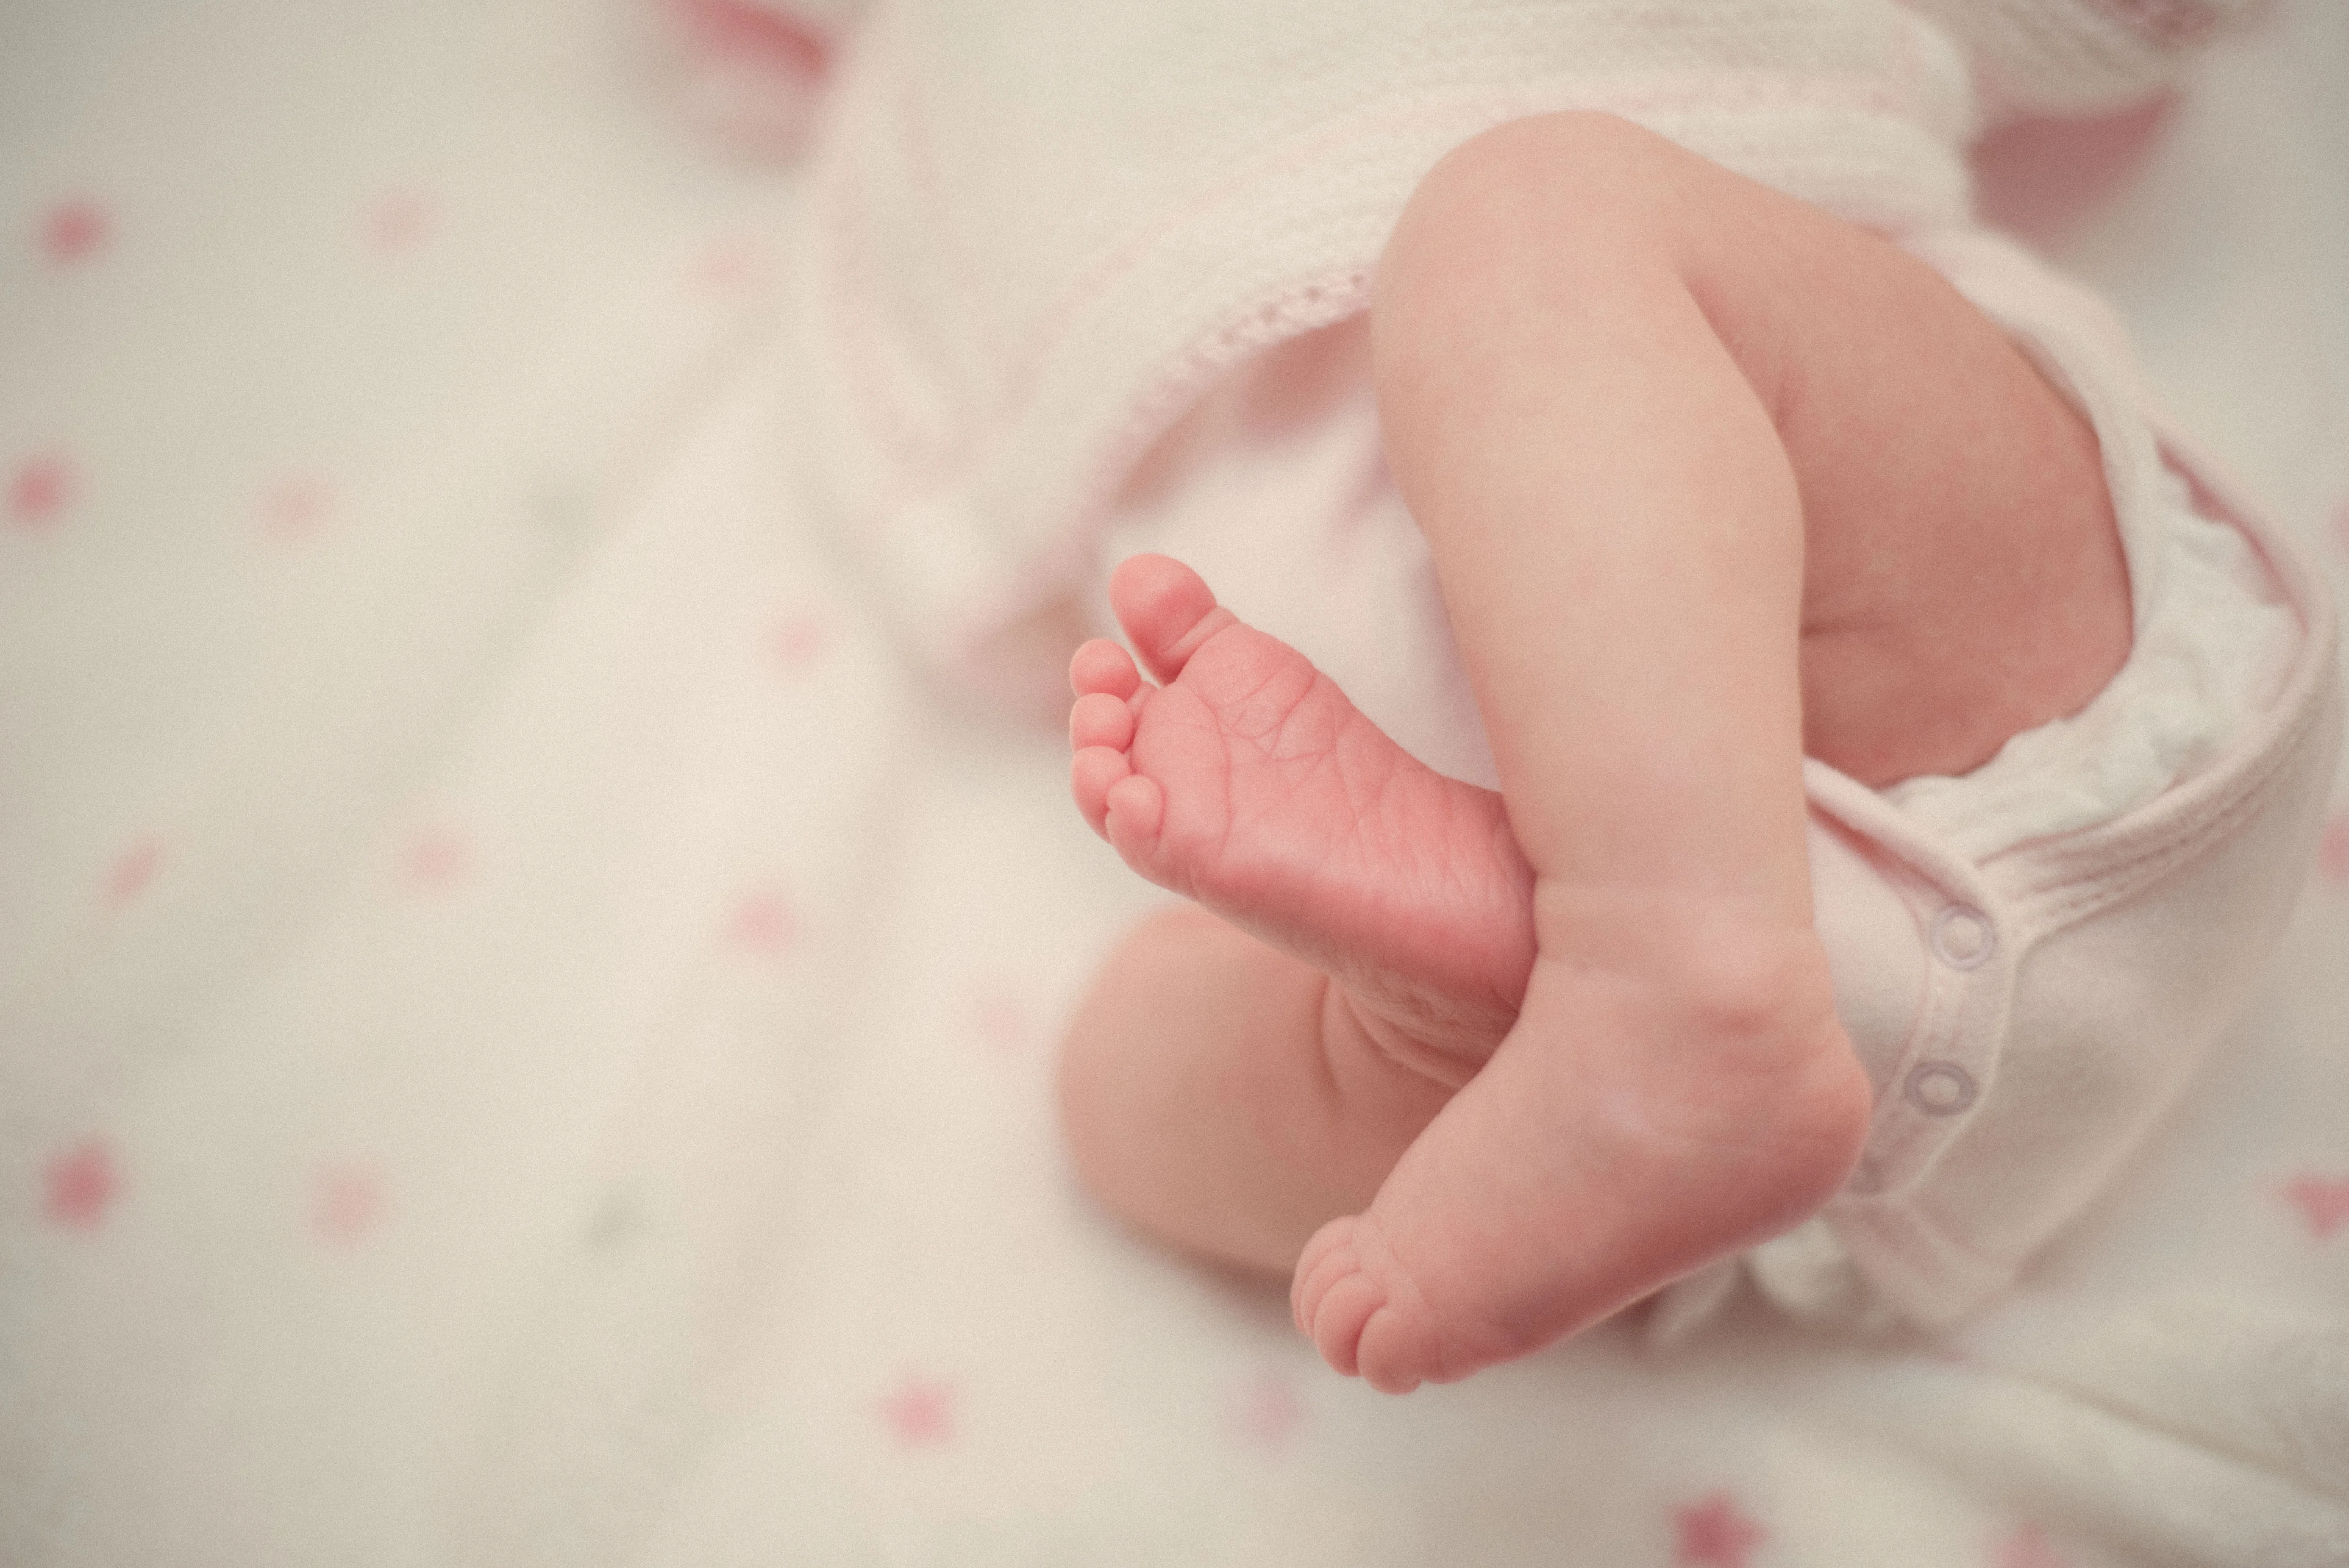 The tiny feet of a newborn laying on a white blanket